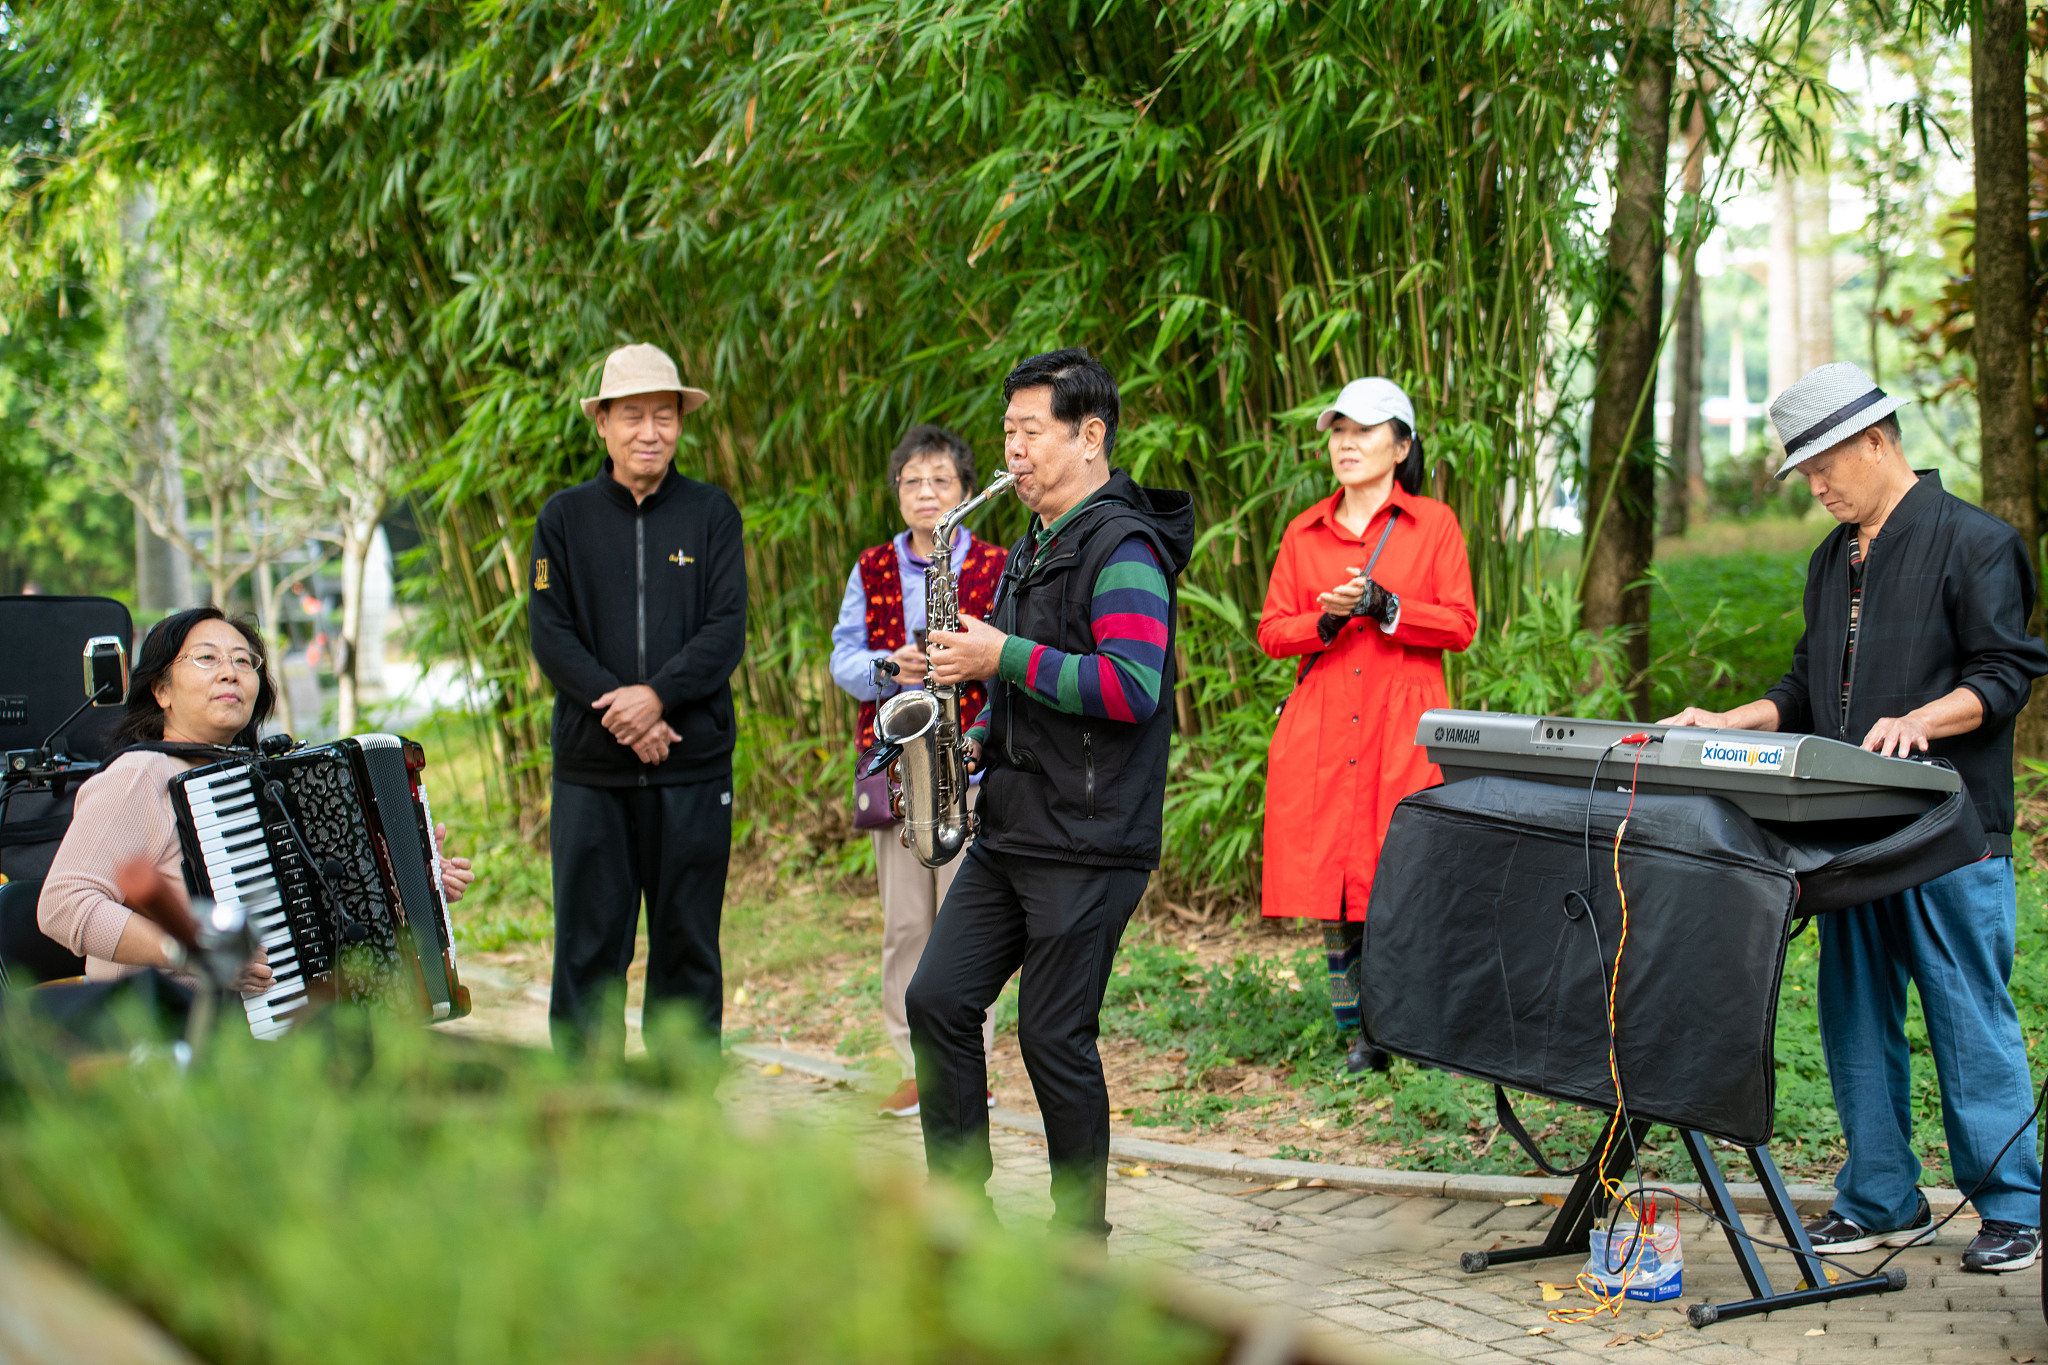 Seniors engage in musical entertainment by the riverside of Wanquan River in Qionghai City, South China's Hainan Province. /CFP